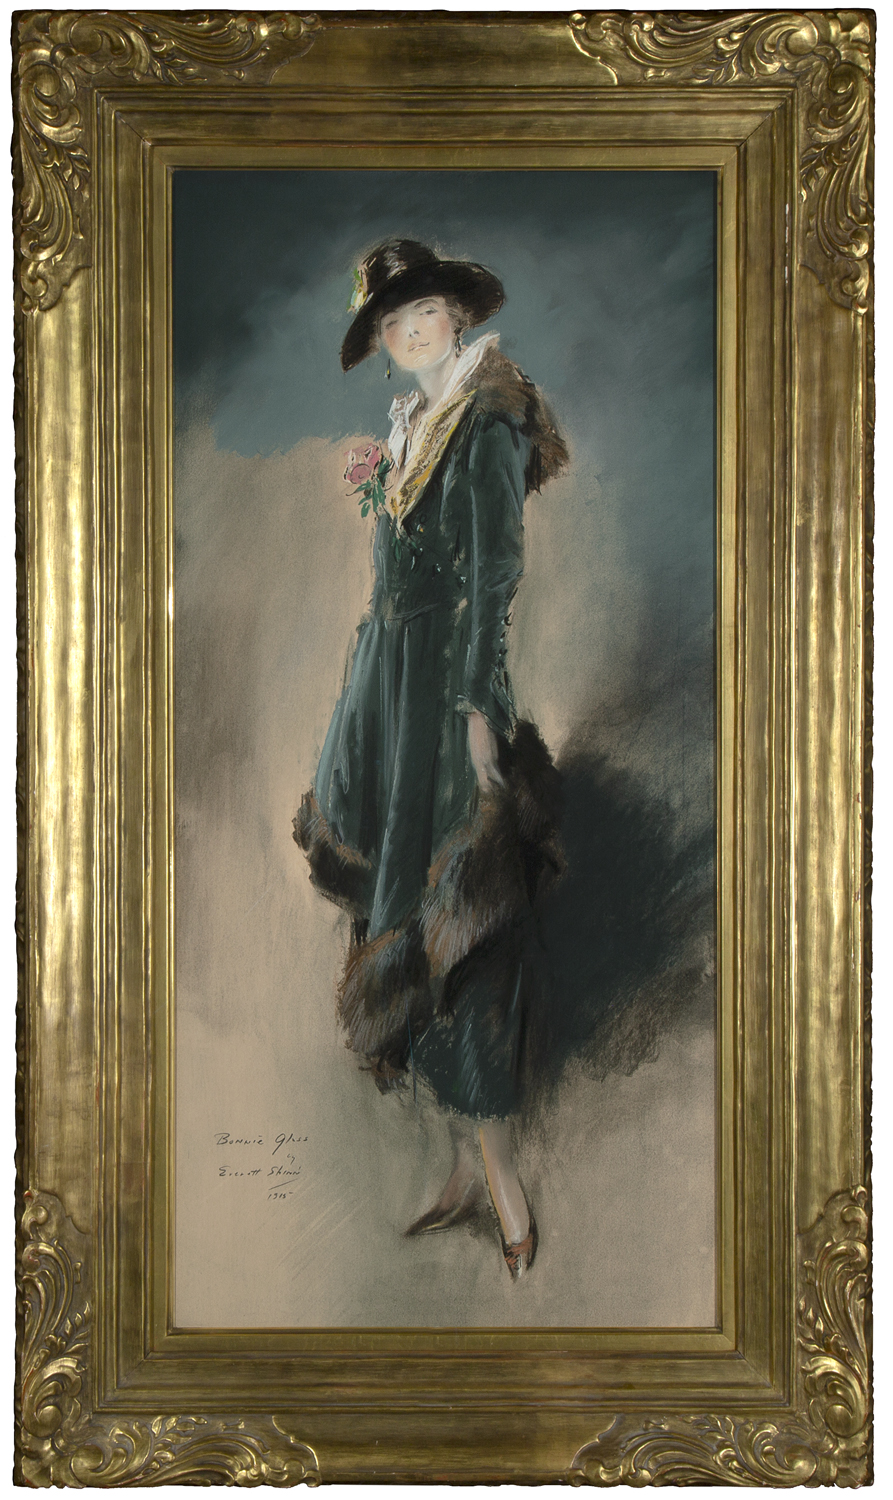 

											American Figurative  </b>

											<em>
												Now on view in New York</em> 

											<h4>
																							</h4>

		                																																													<i>Everitt Shinn,</i>  
																																								Bonnie Glass, 1915 , 
																																								pastel on paper, 
																																								33 1⁄2 x 15 3/4 inches, 42 5/8 x 24 7/8 inches framed 
																								
		                				